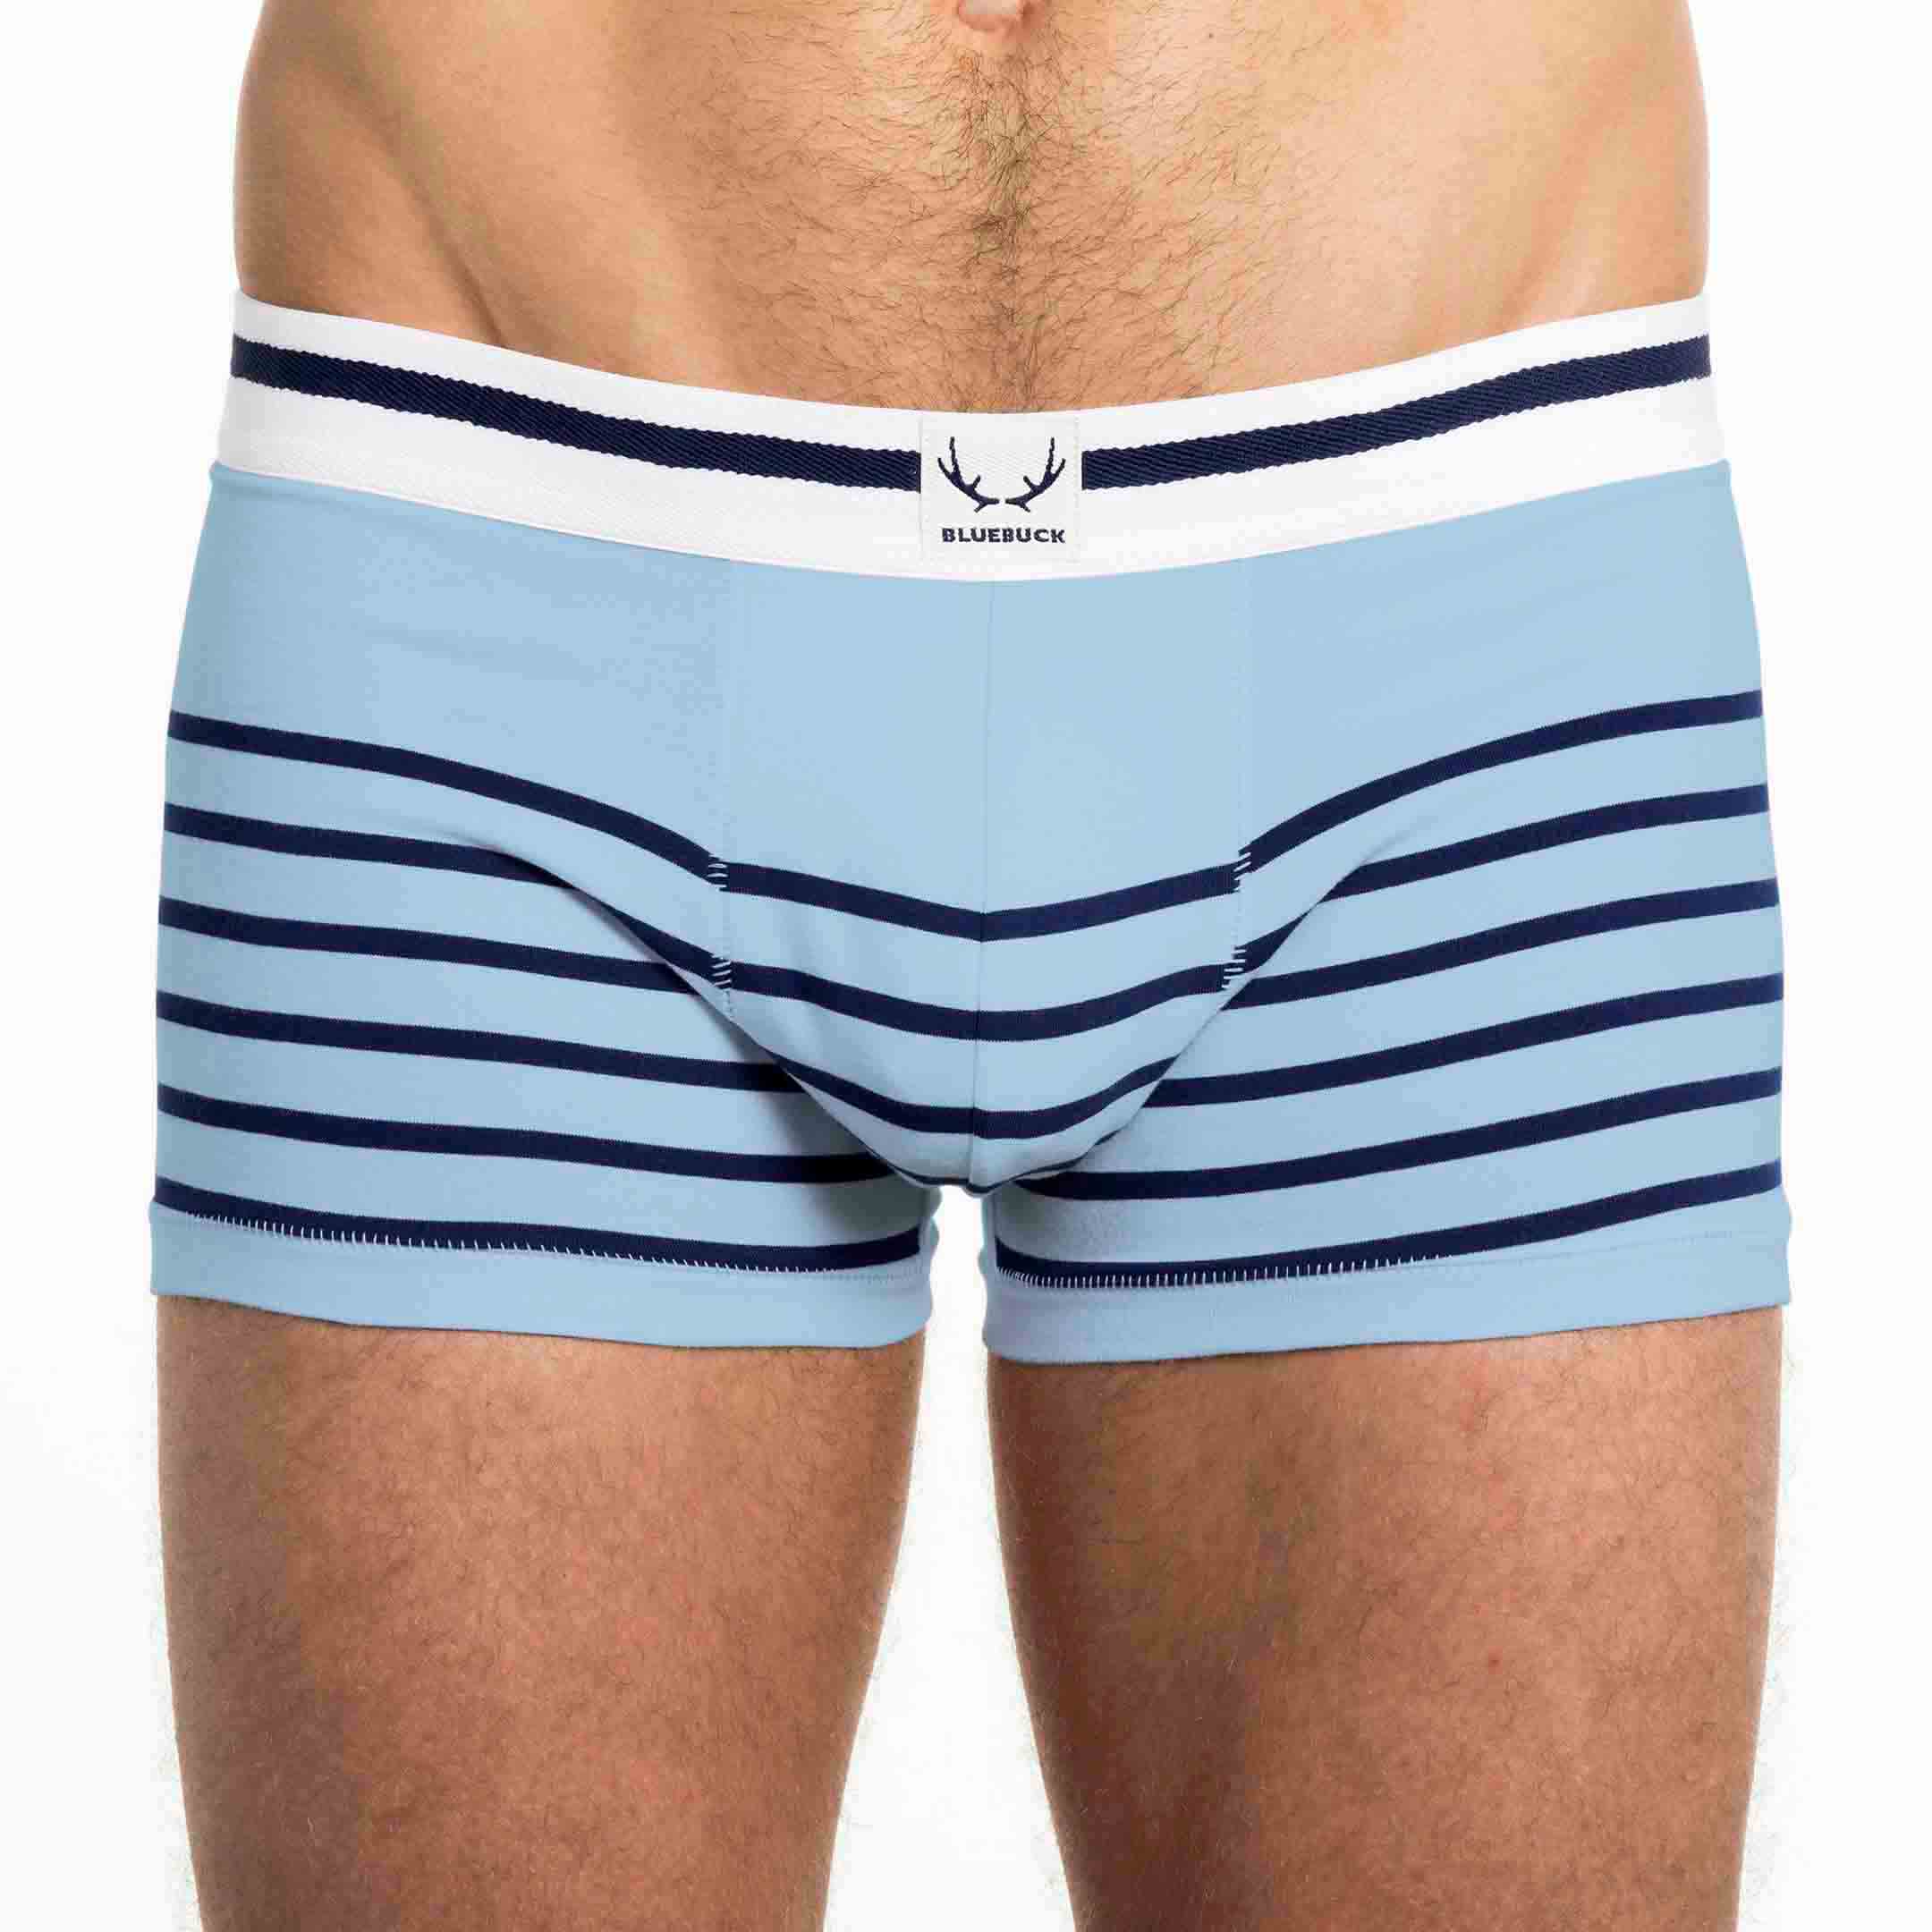 Blue-black striped boxer shorts made of organic cotton from Bluebuck